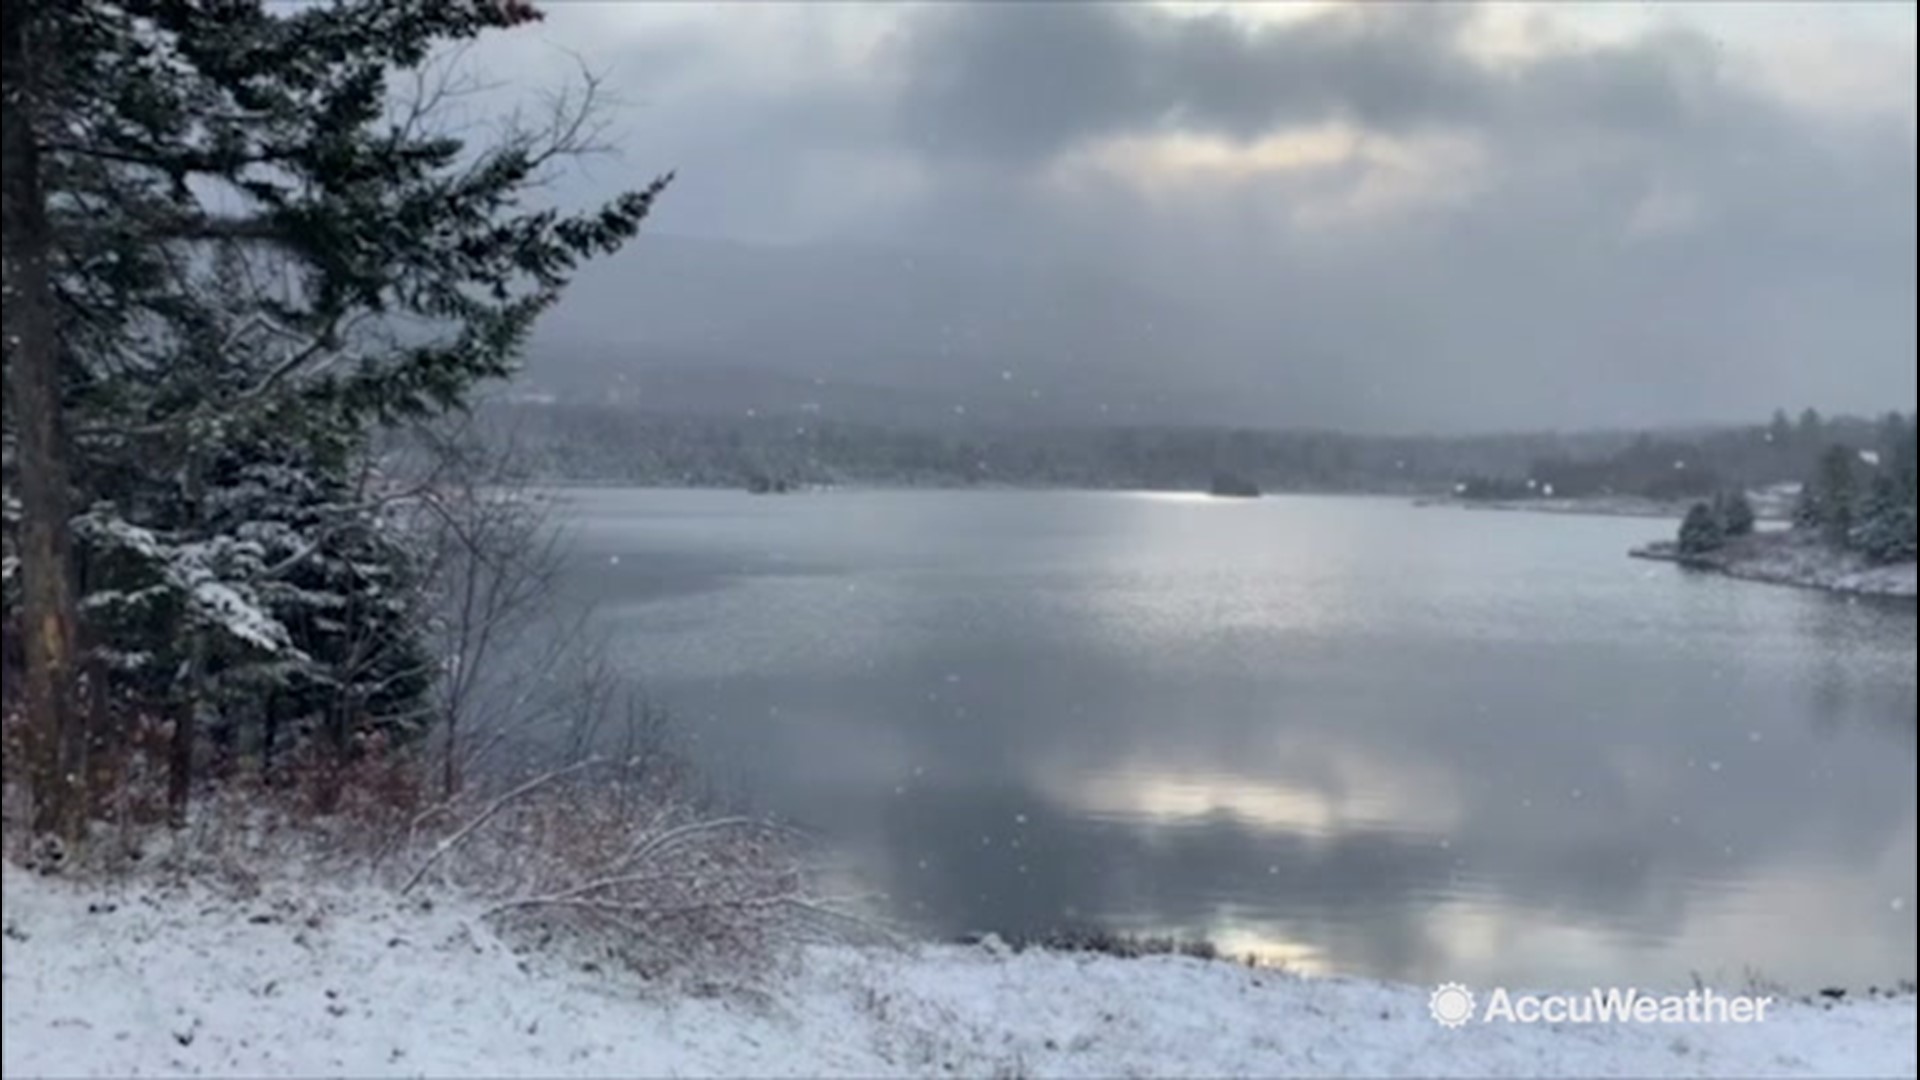 Blueberry Lake is getting its first taste of winter weather, but there are several weeks to go before thick ice develops. In just a couple months, the lake will be a popular Vermont destination for ice fishing, cross-country skiing and snowshoeing.